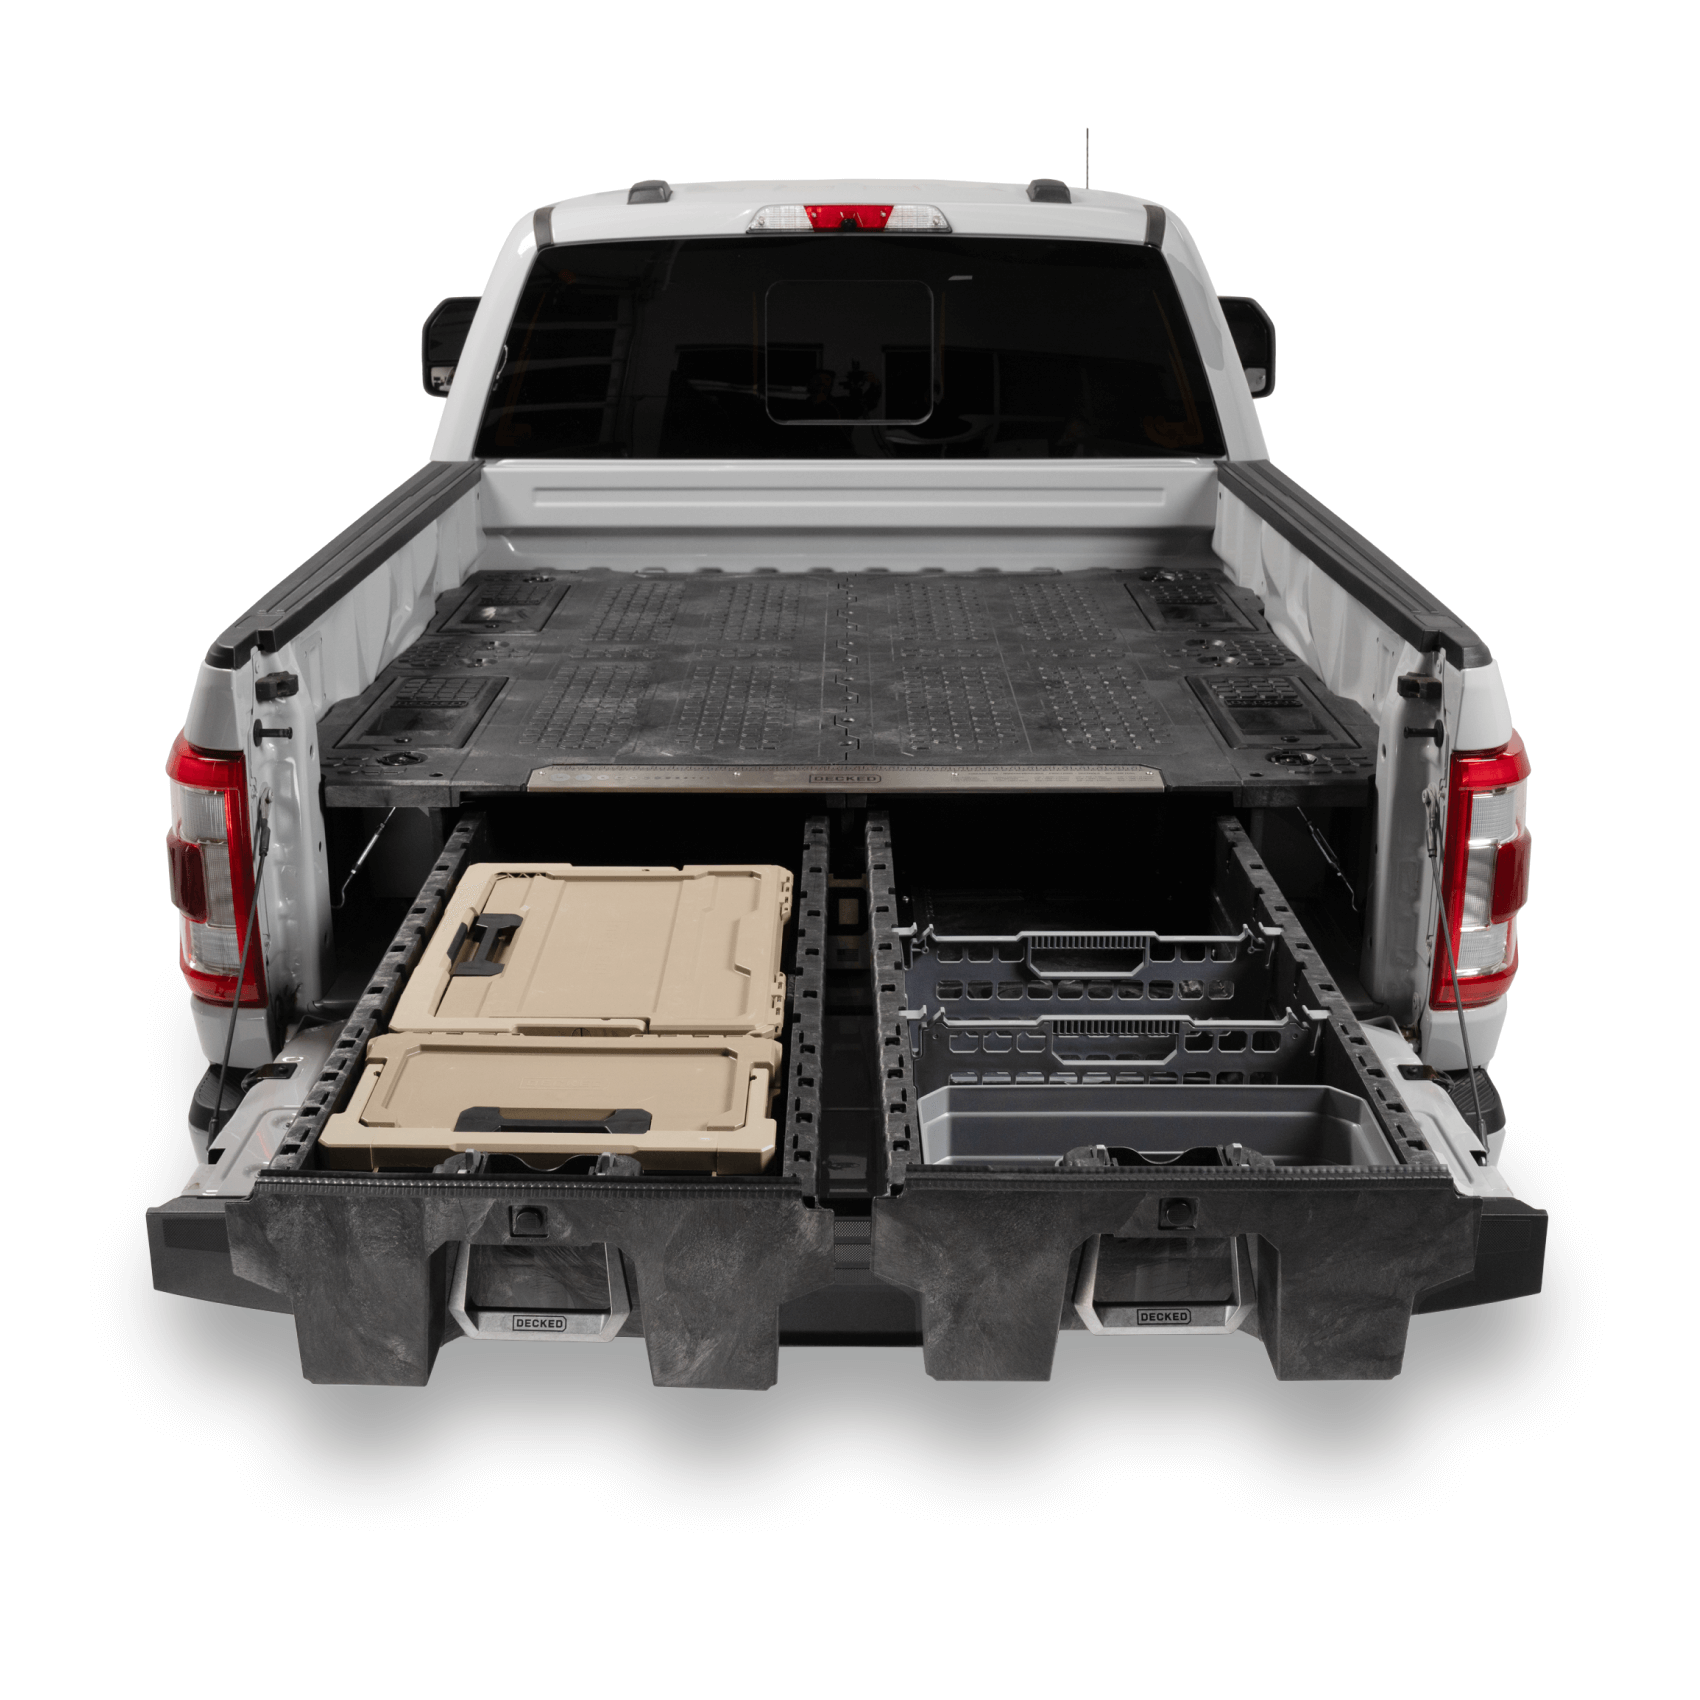 Service Body Drawers - Tool & Equipment Storage For Utility Trucks